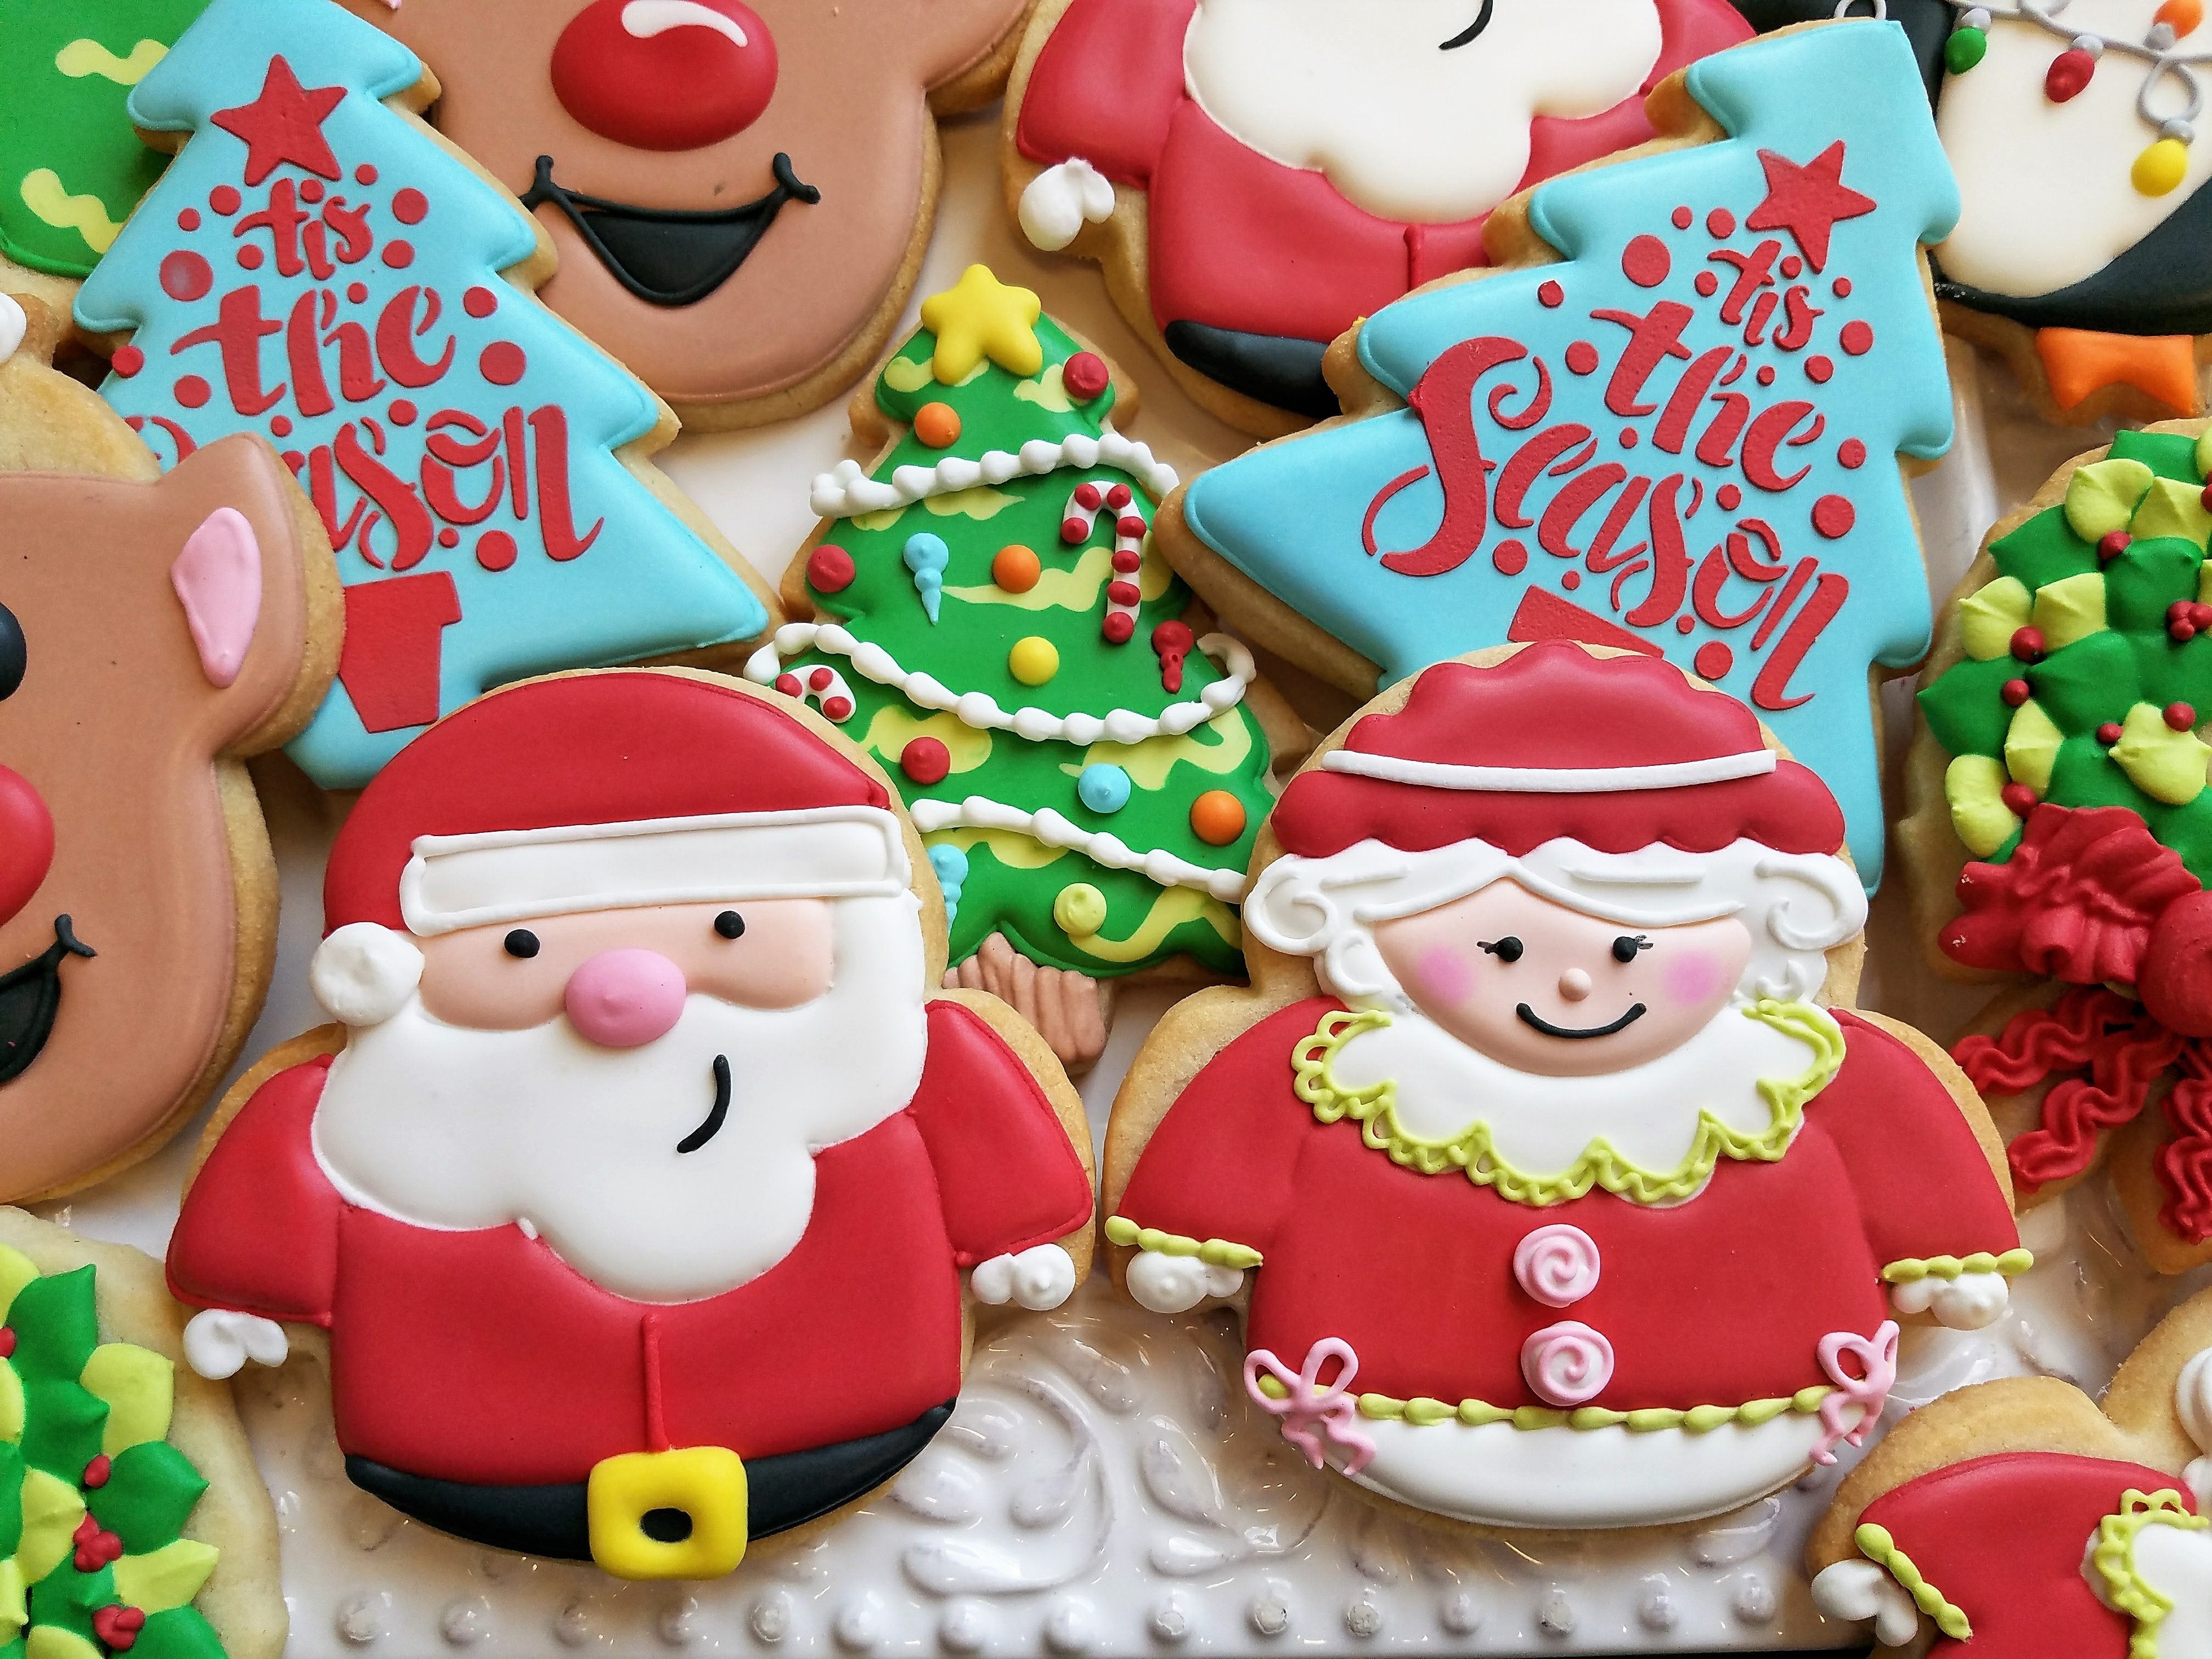 How to Make a Mrs. Claus Cookie Set